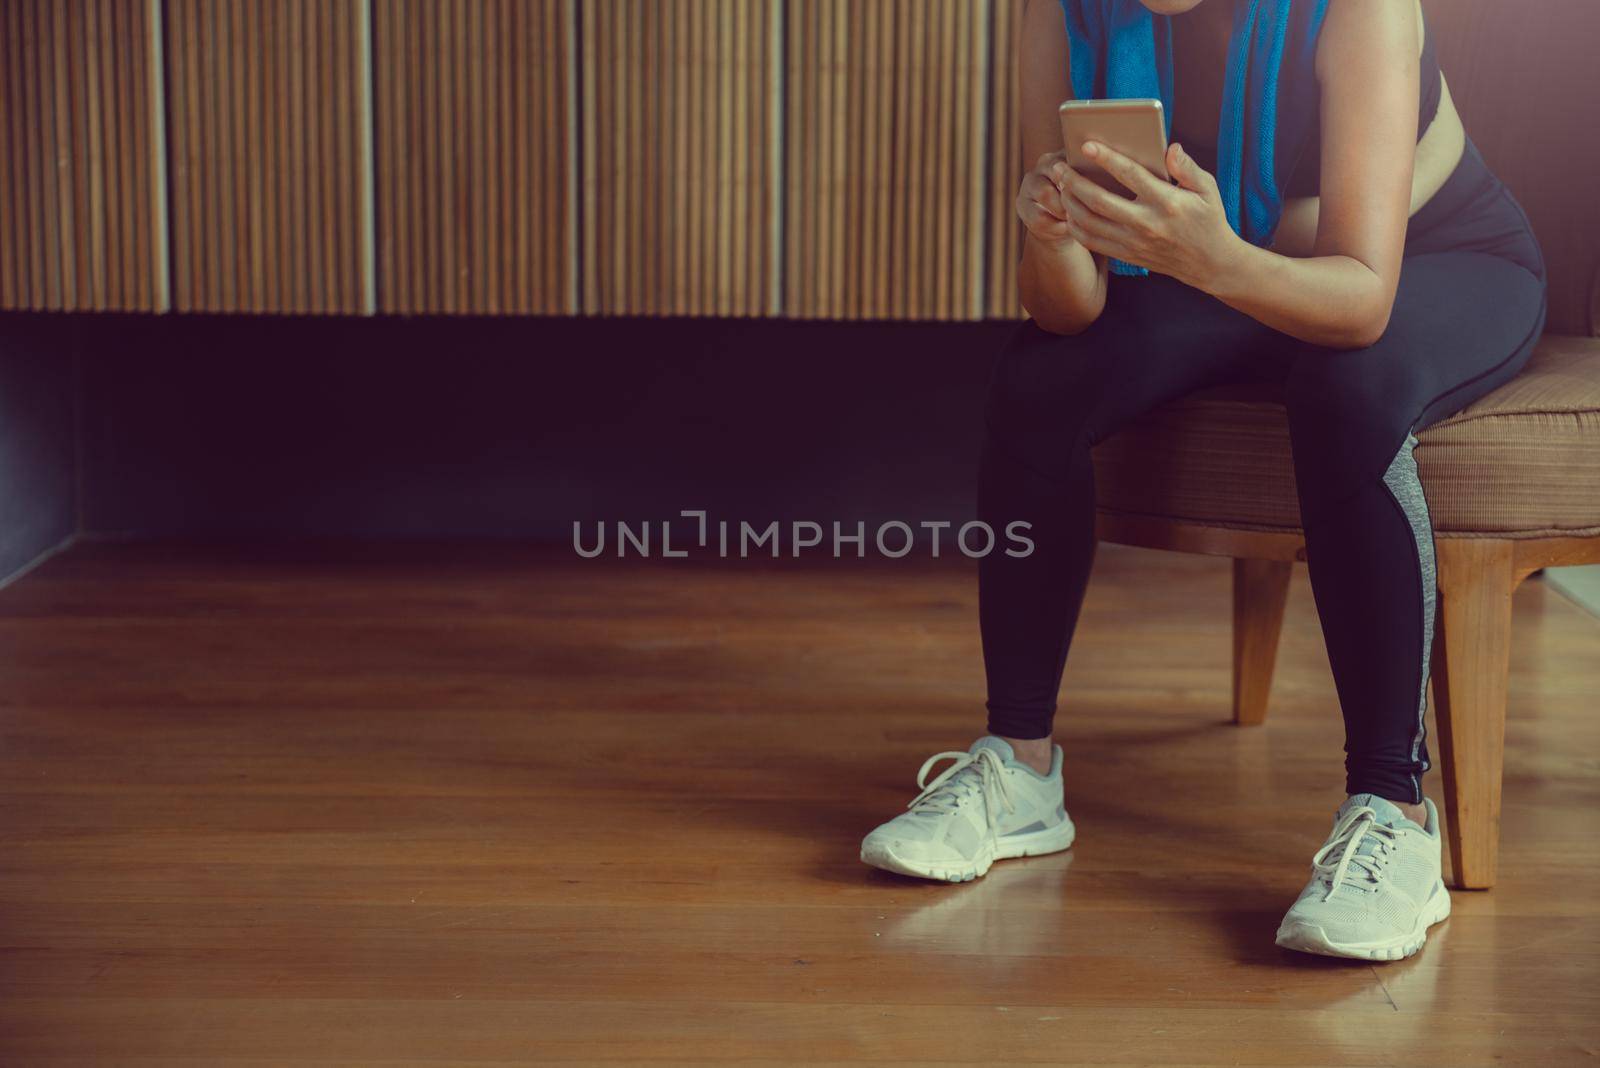 Sportswoman sitting and using smartphone in locker room at gym. by thanumporn